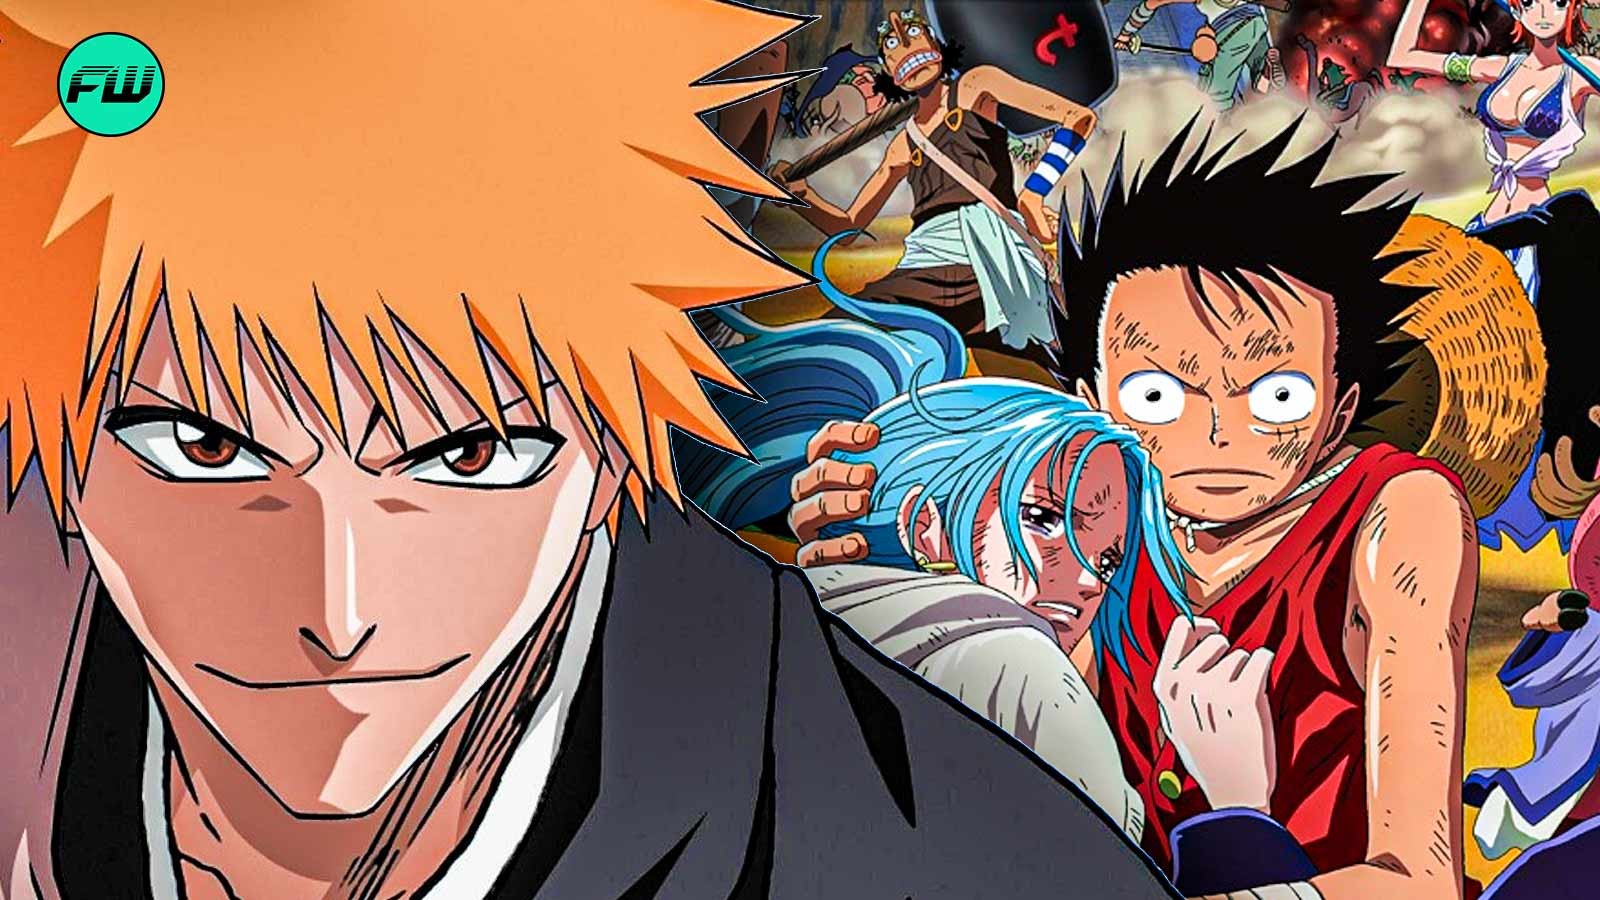 Bleach and One Piece